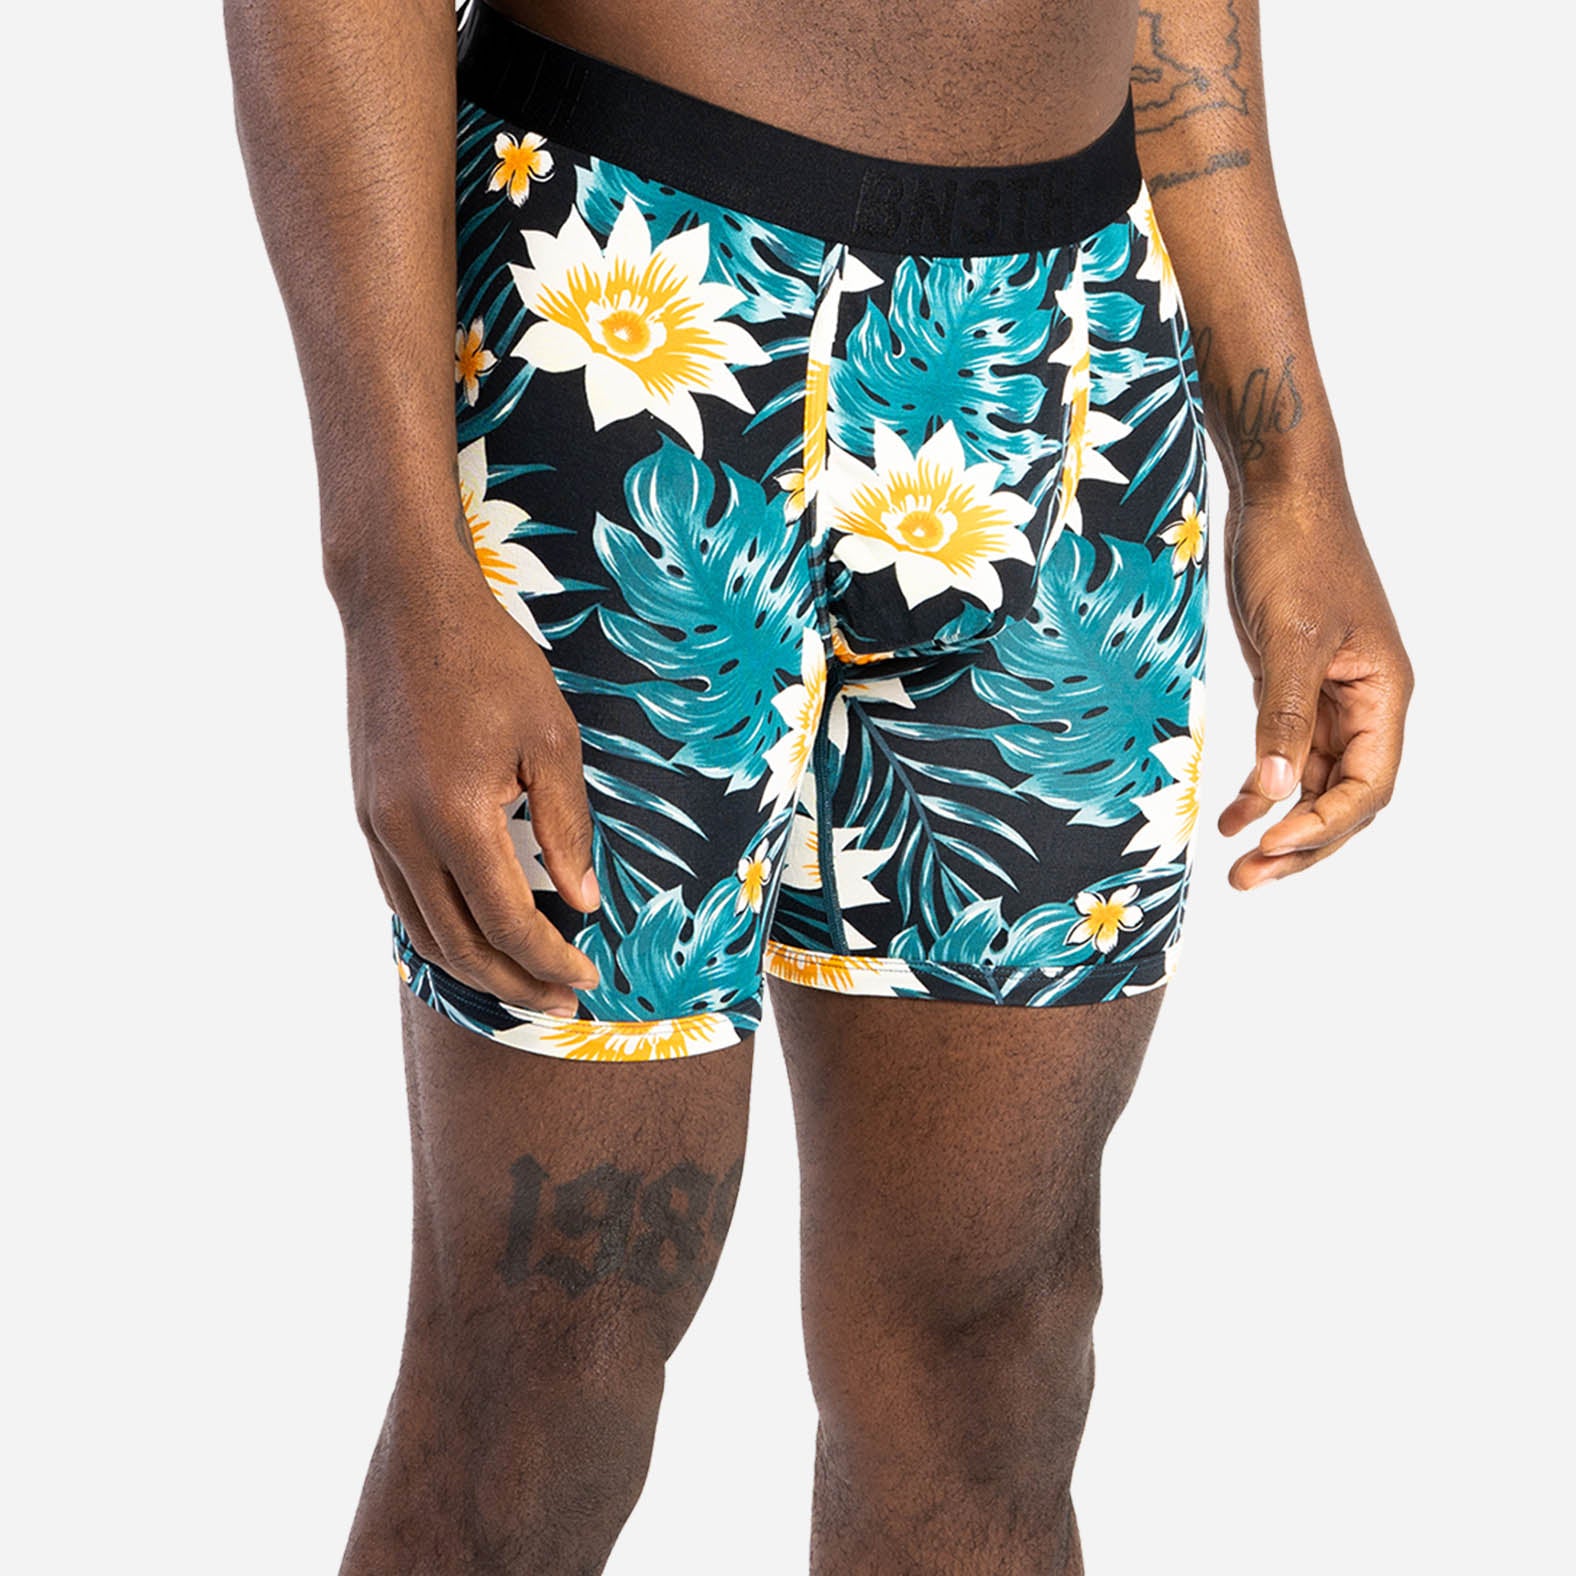 Buy BN3TH Men's Classic Boxer Brief-Prints Collection (Chilis, Large) at